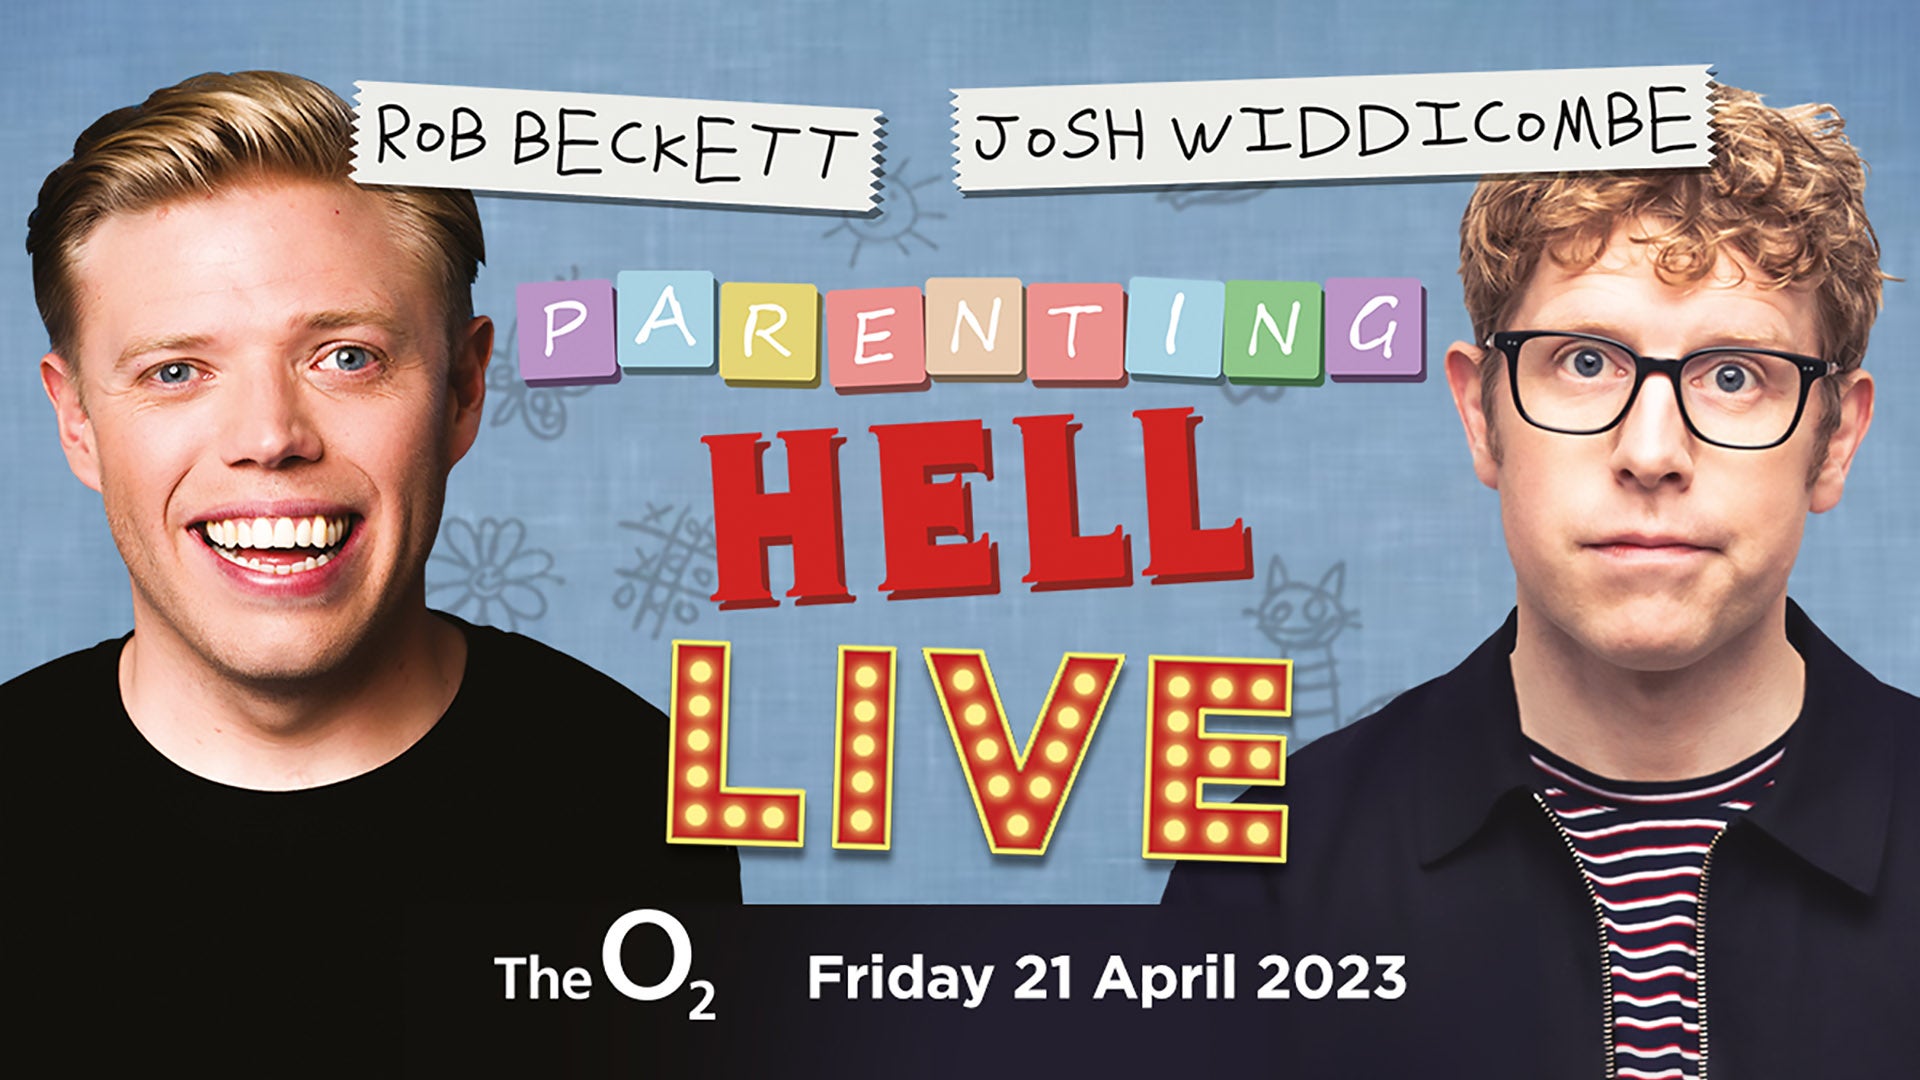 parenting hell tour 02